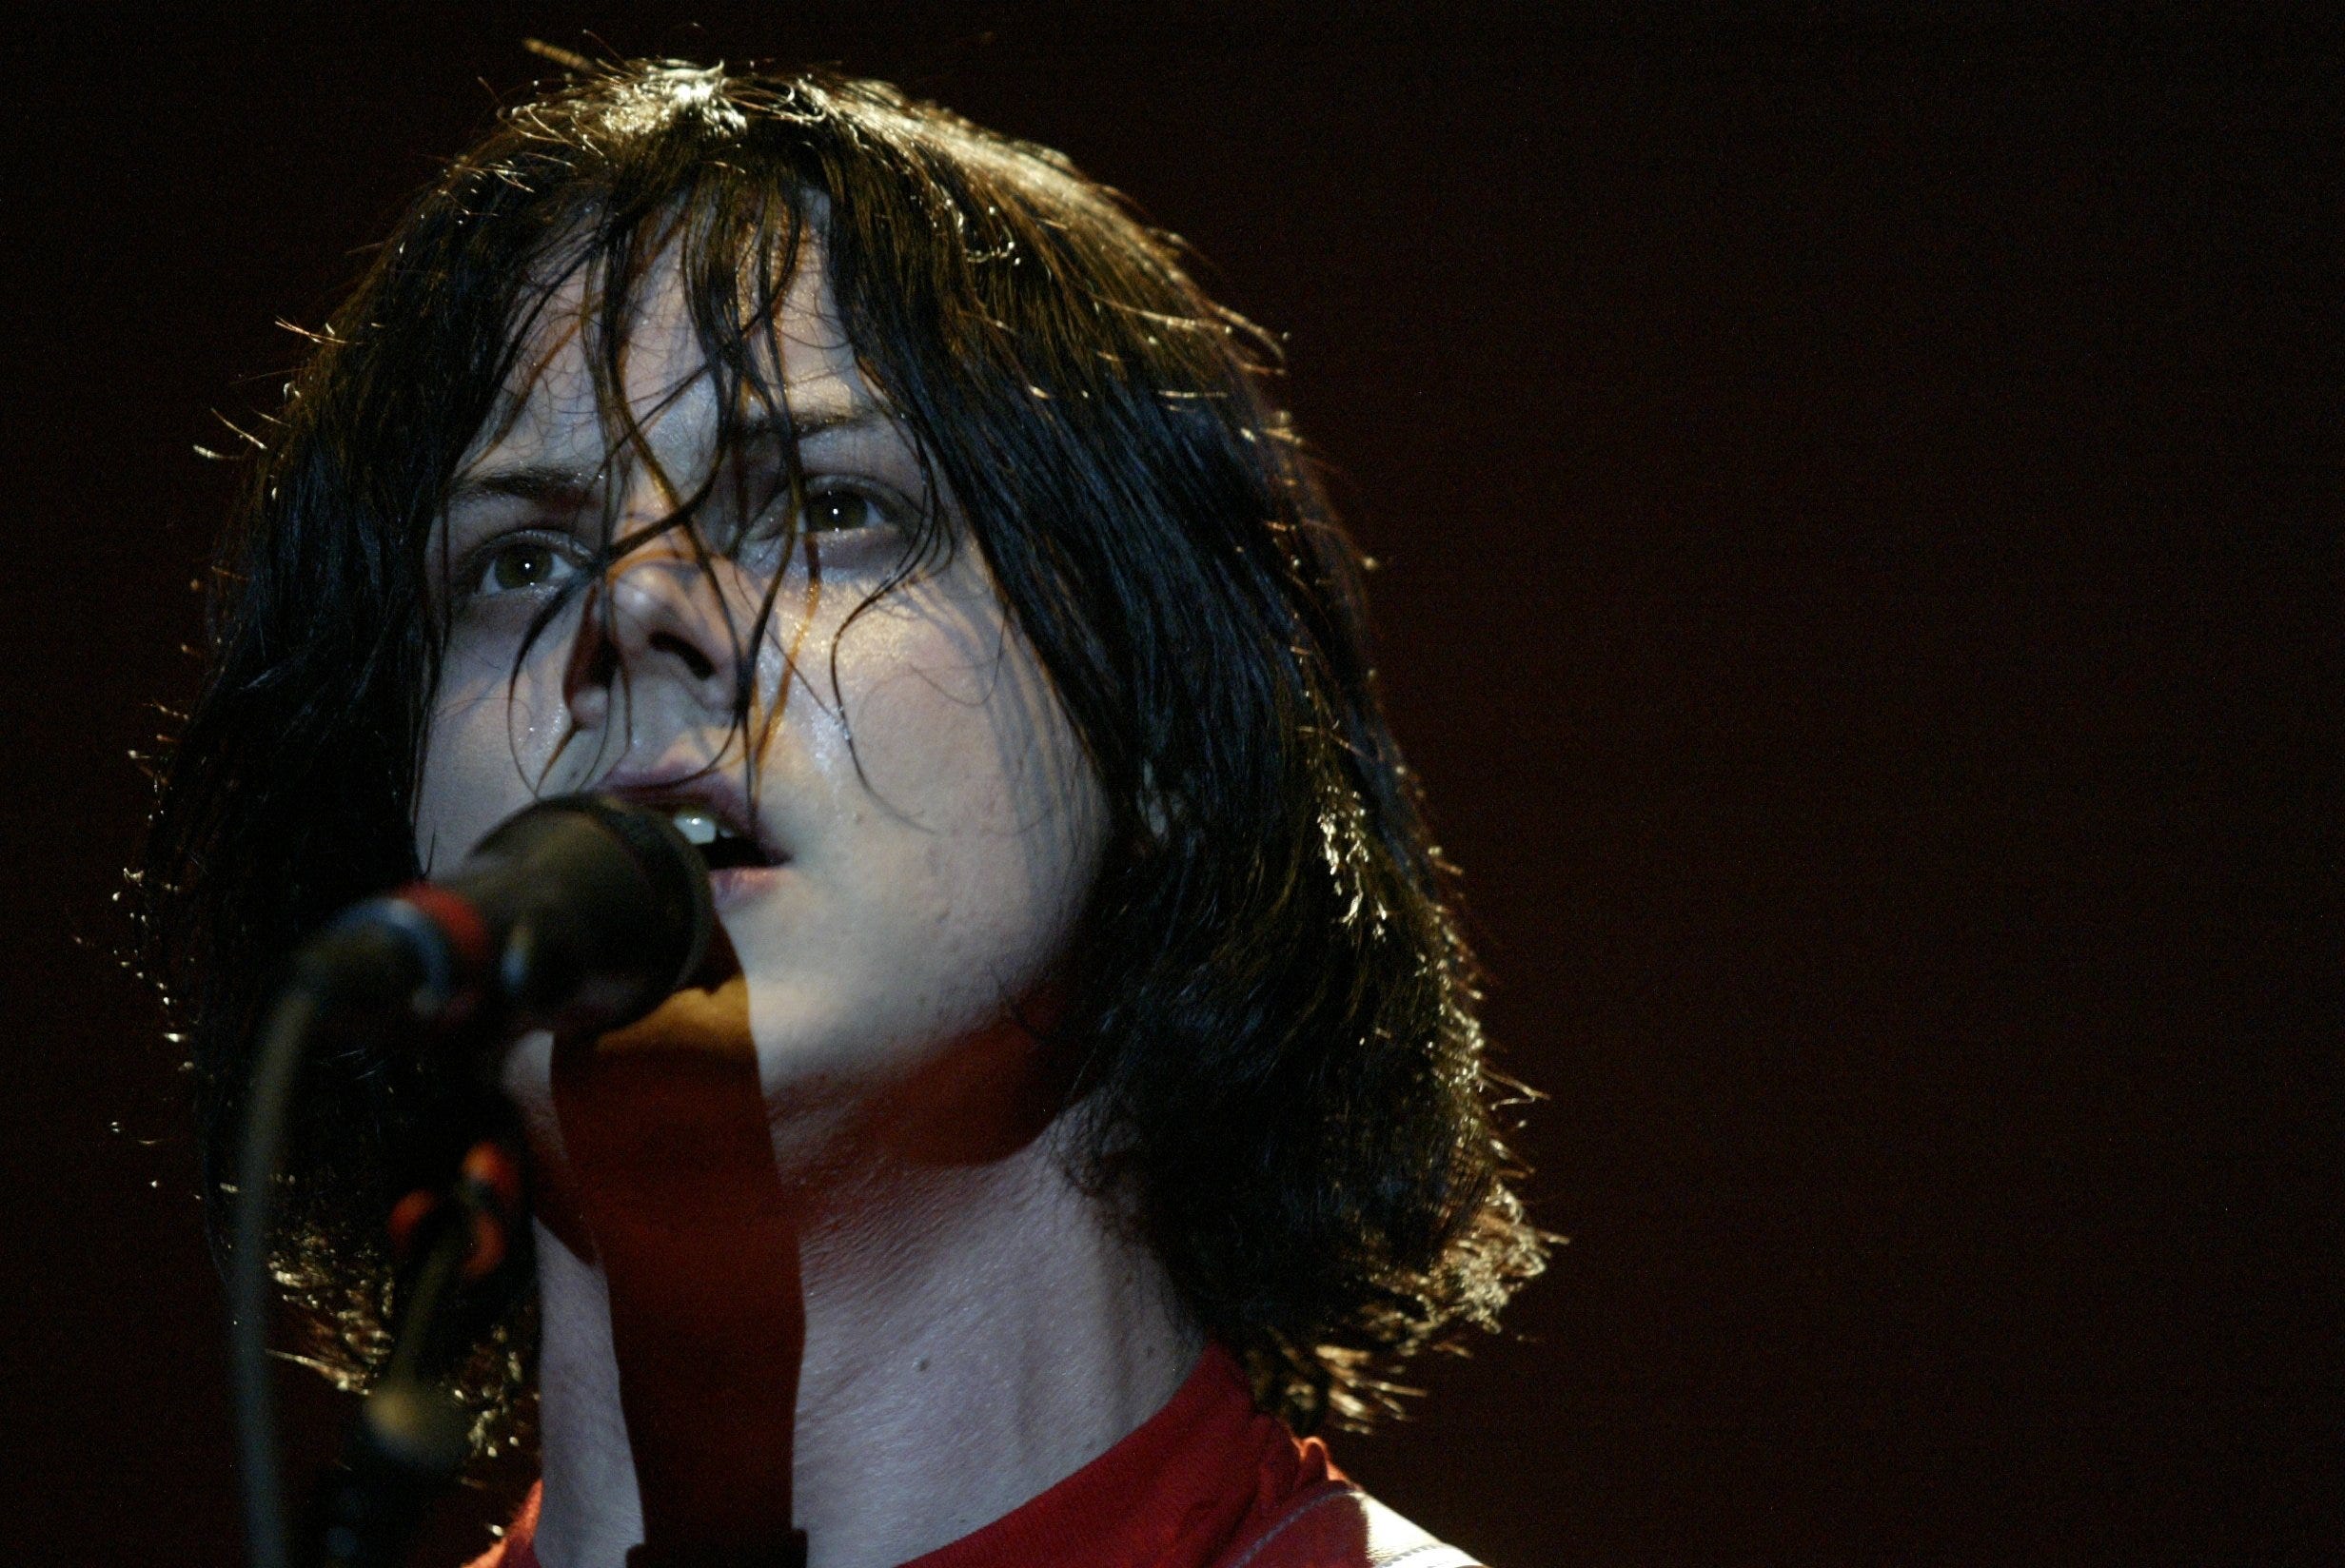 When The White Stripes brought the blues to The Grammys